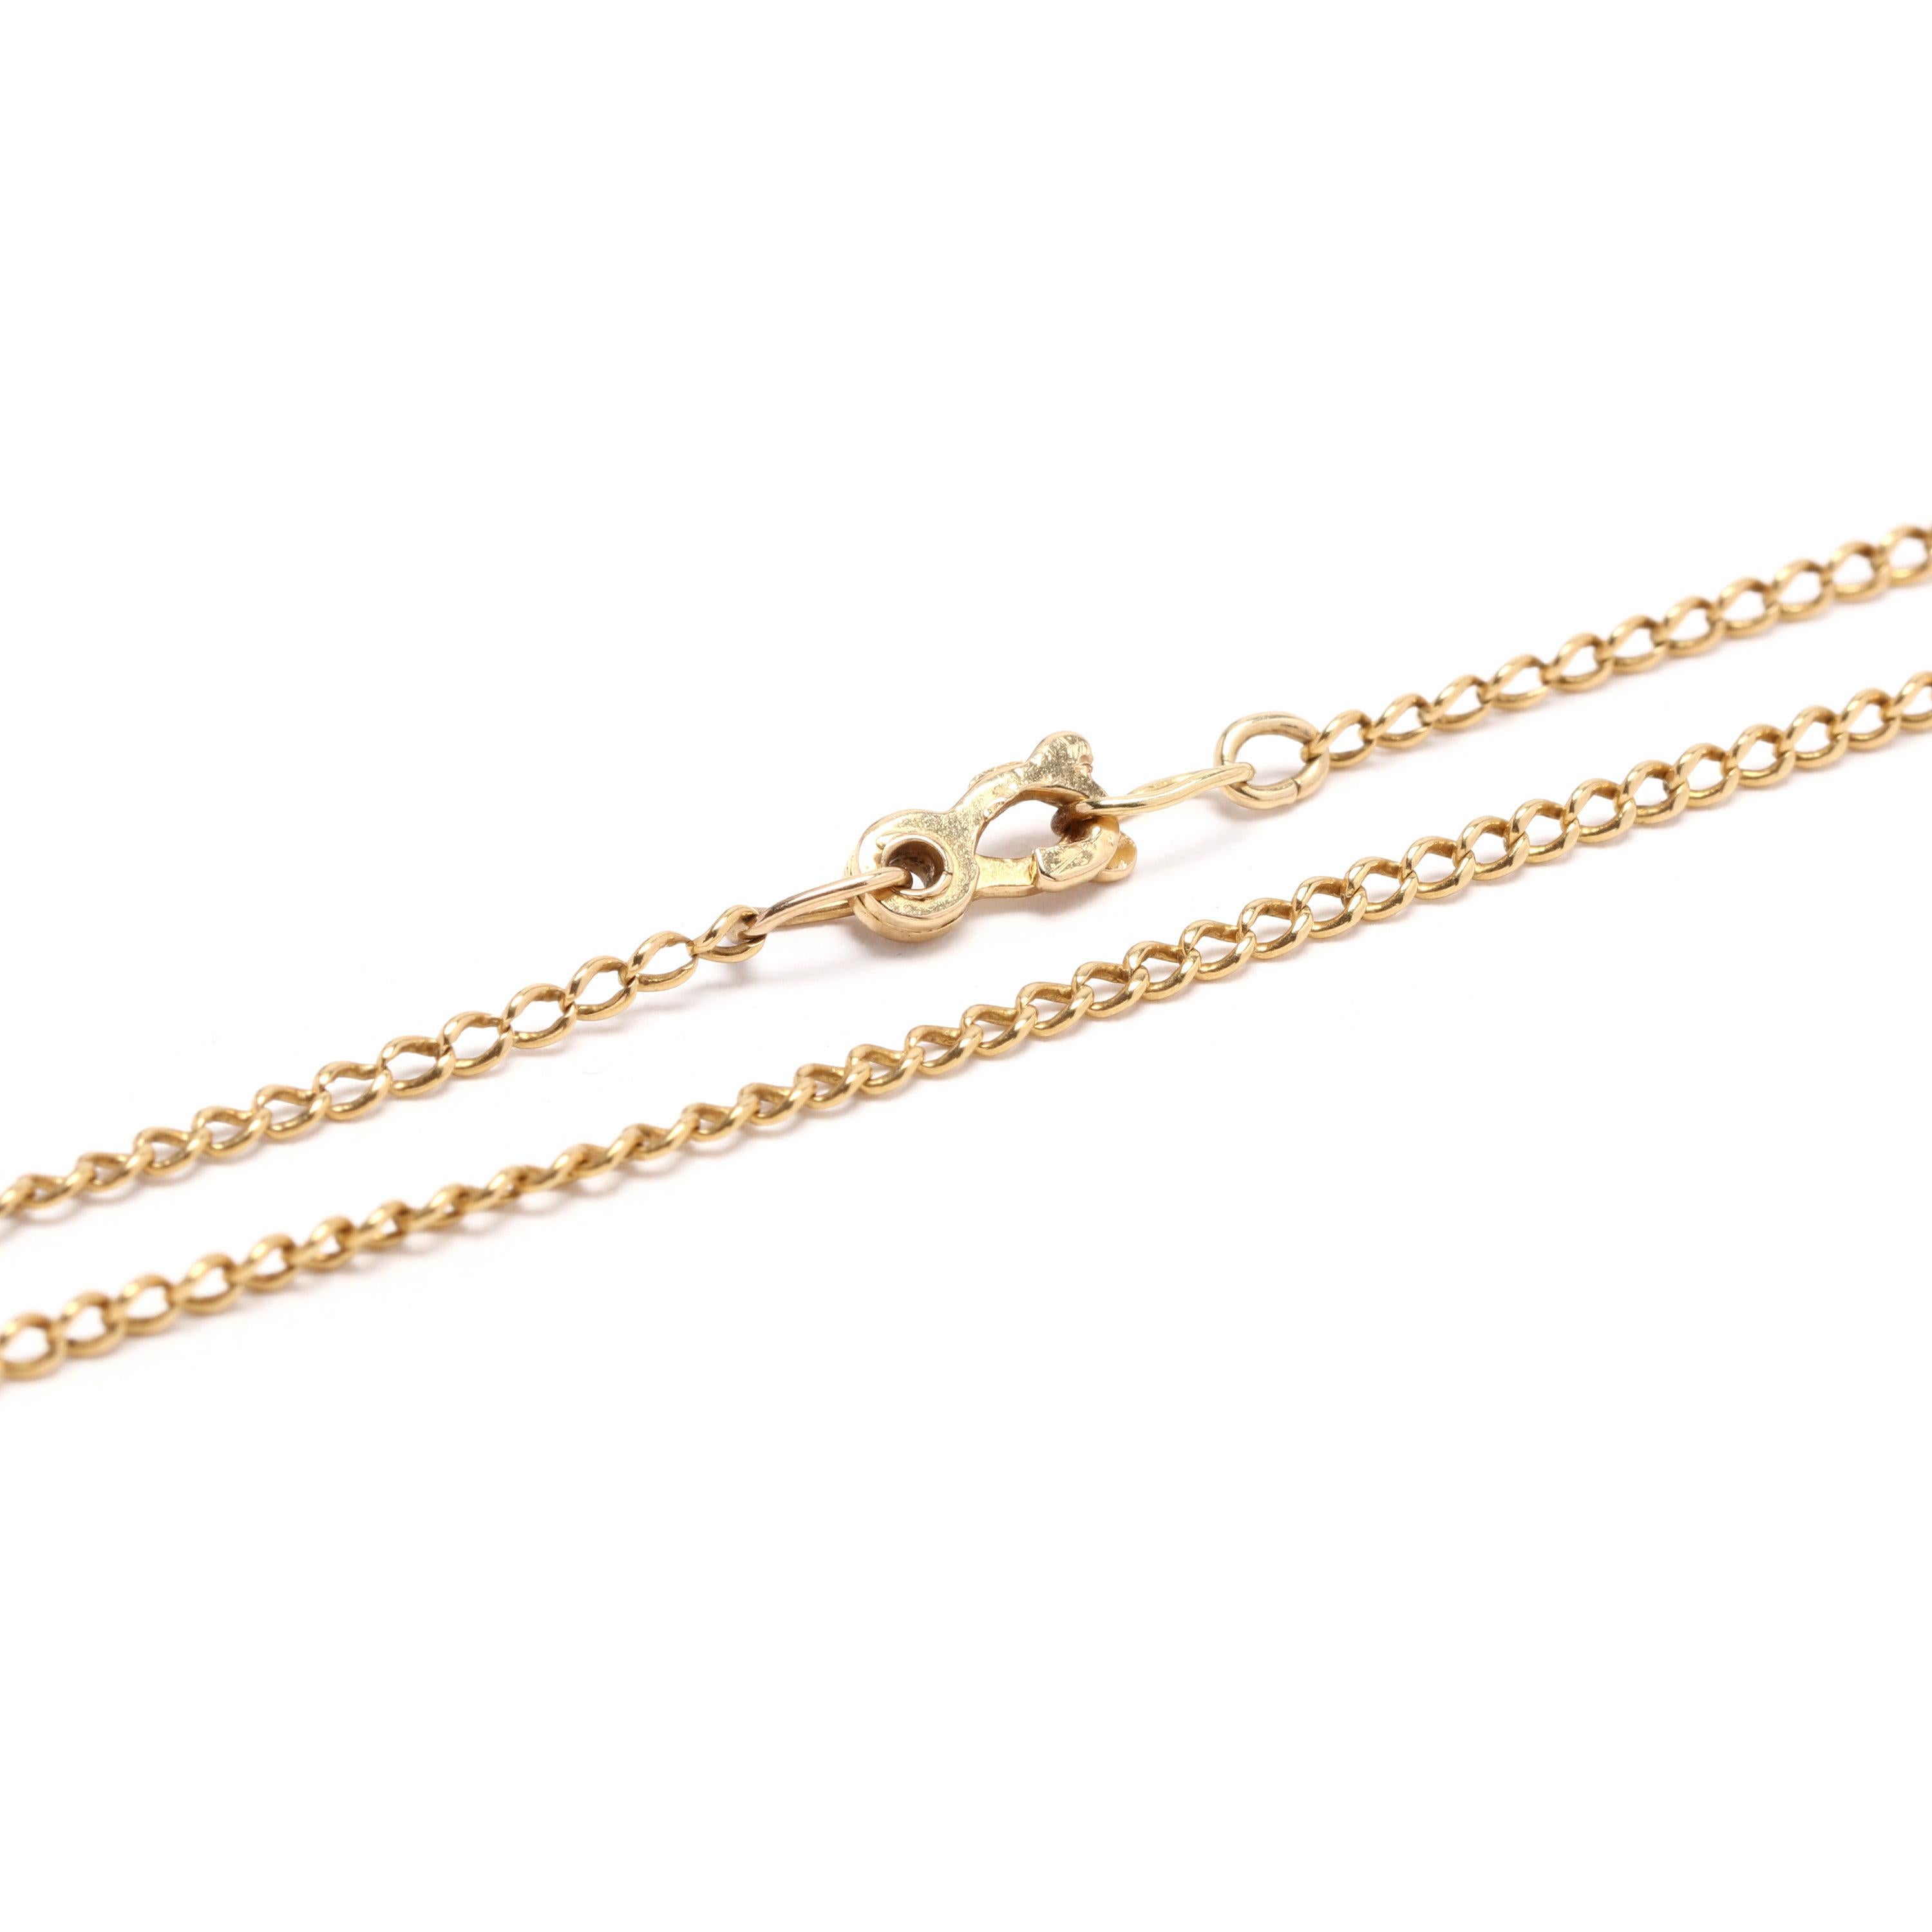 Women's or Men's 18k Yellow Gold Thin Curb Chain